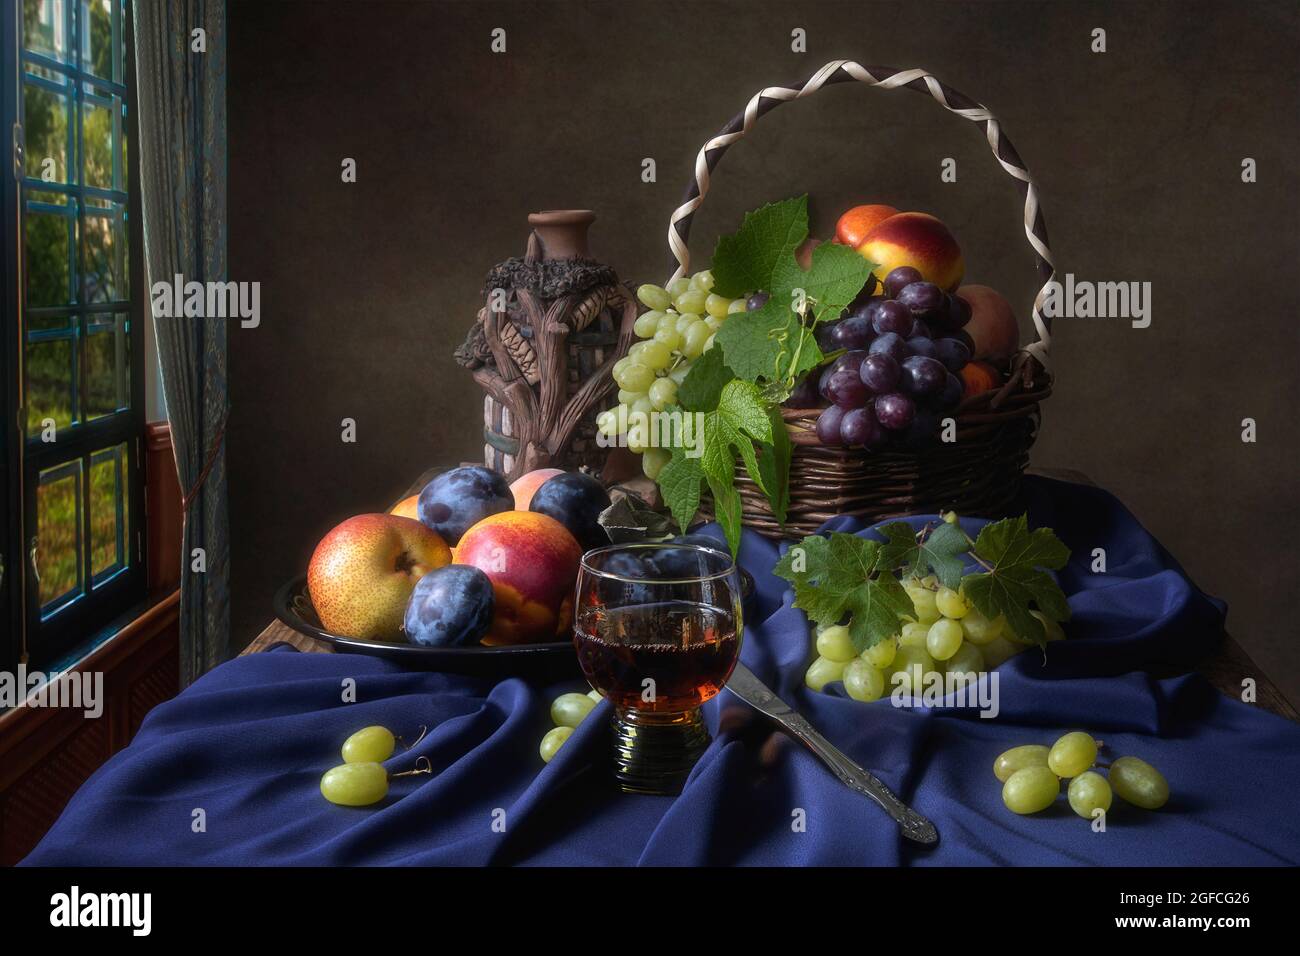 Still life with fruits and wine glass Stock Photo